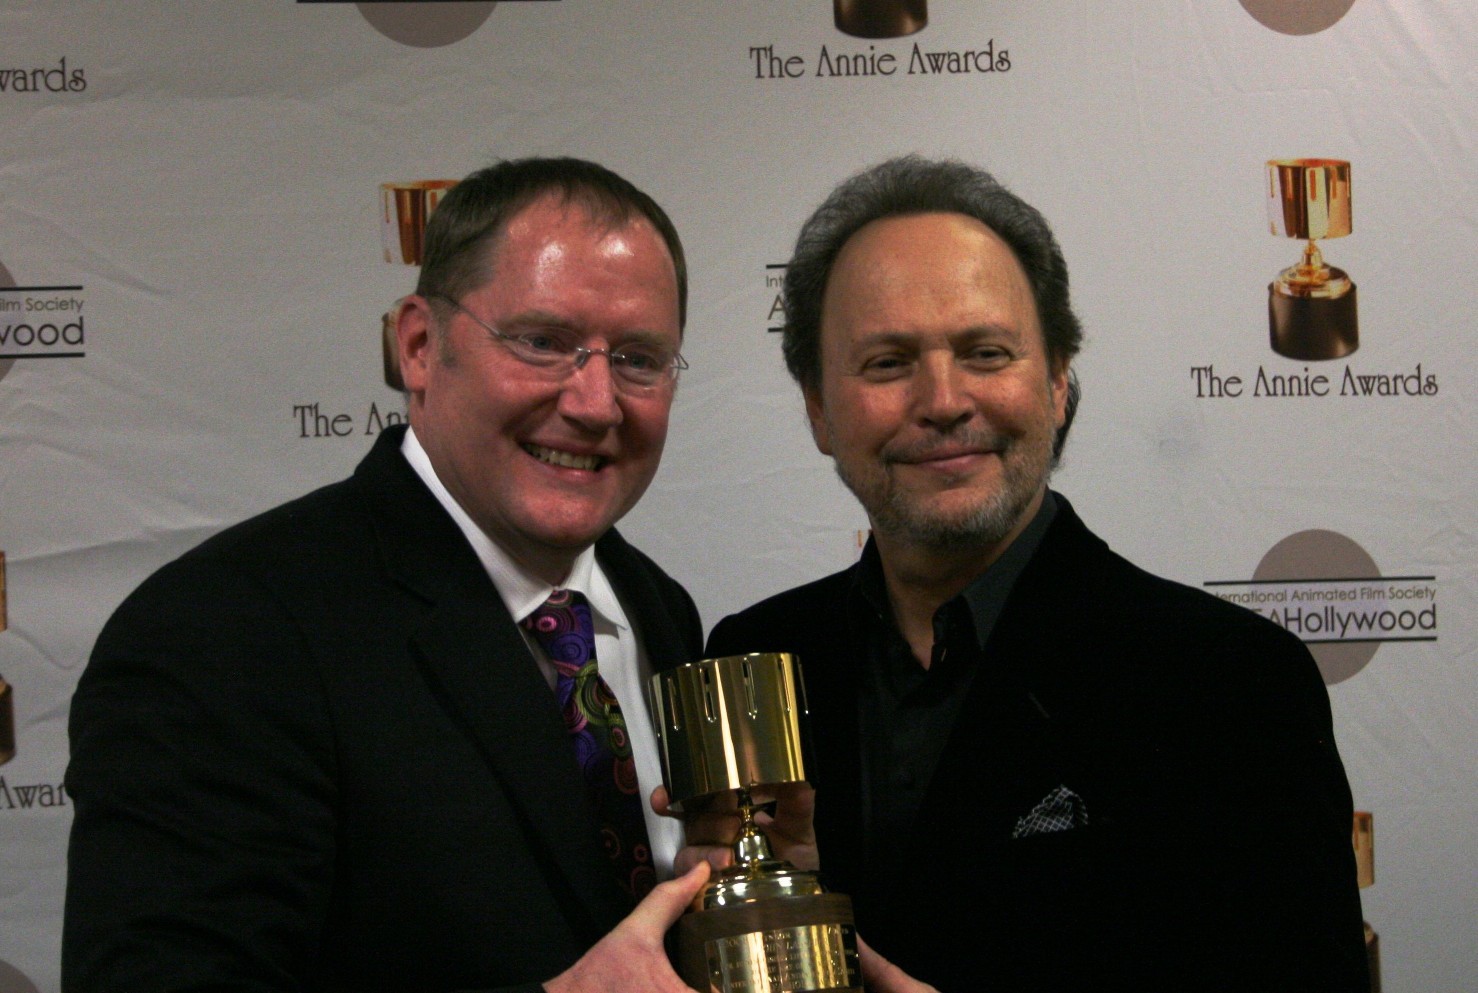 John Lasseter, winner of the Ub Iwerks award, and Billy Crystal, who presented it to him